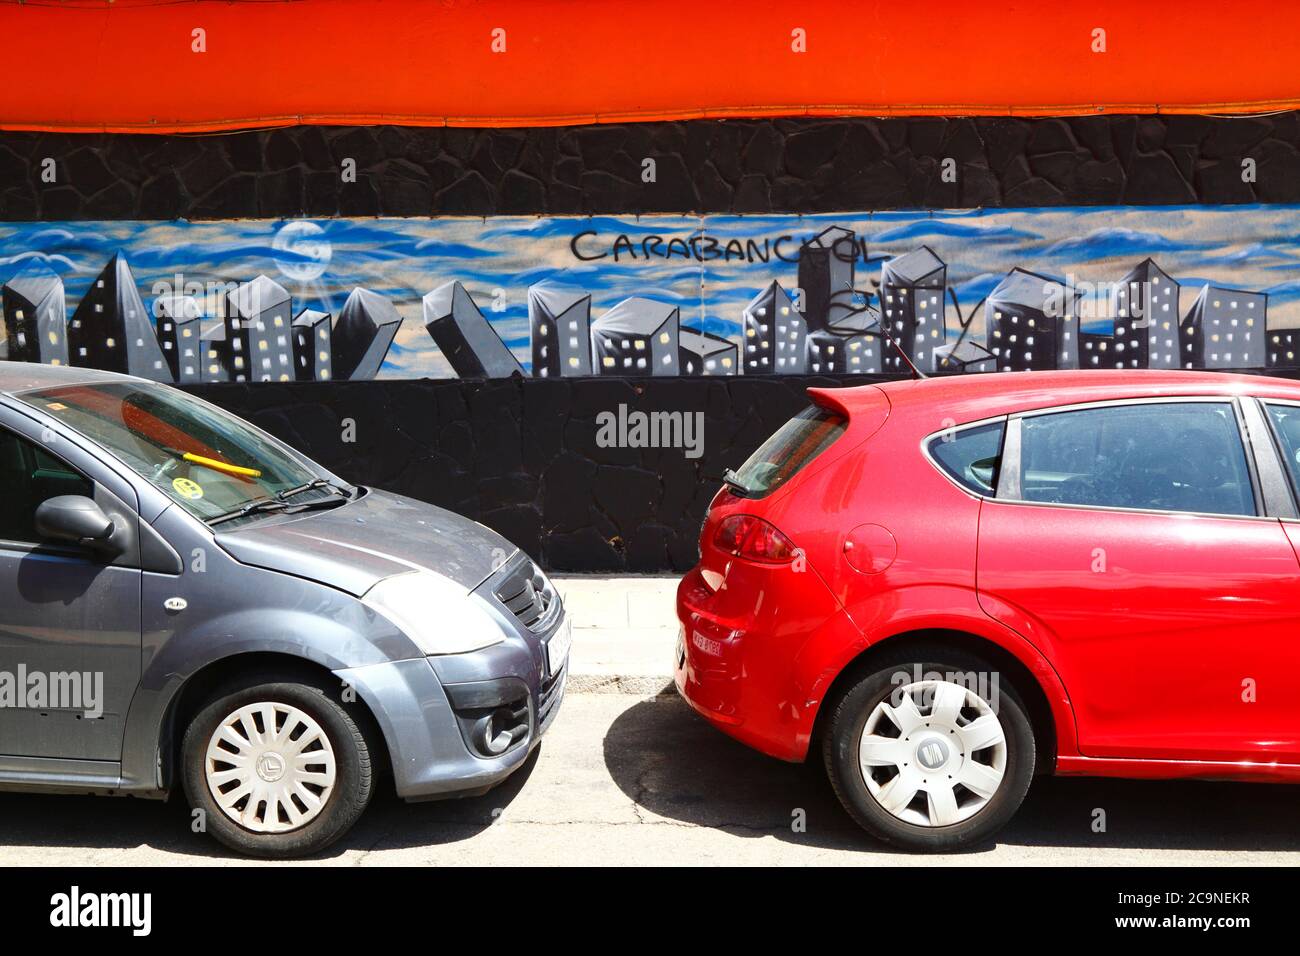 Parked cars and graffiti on mural, Carabanchel district, Madrid , Spain Stock Photo